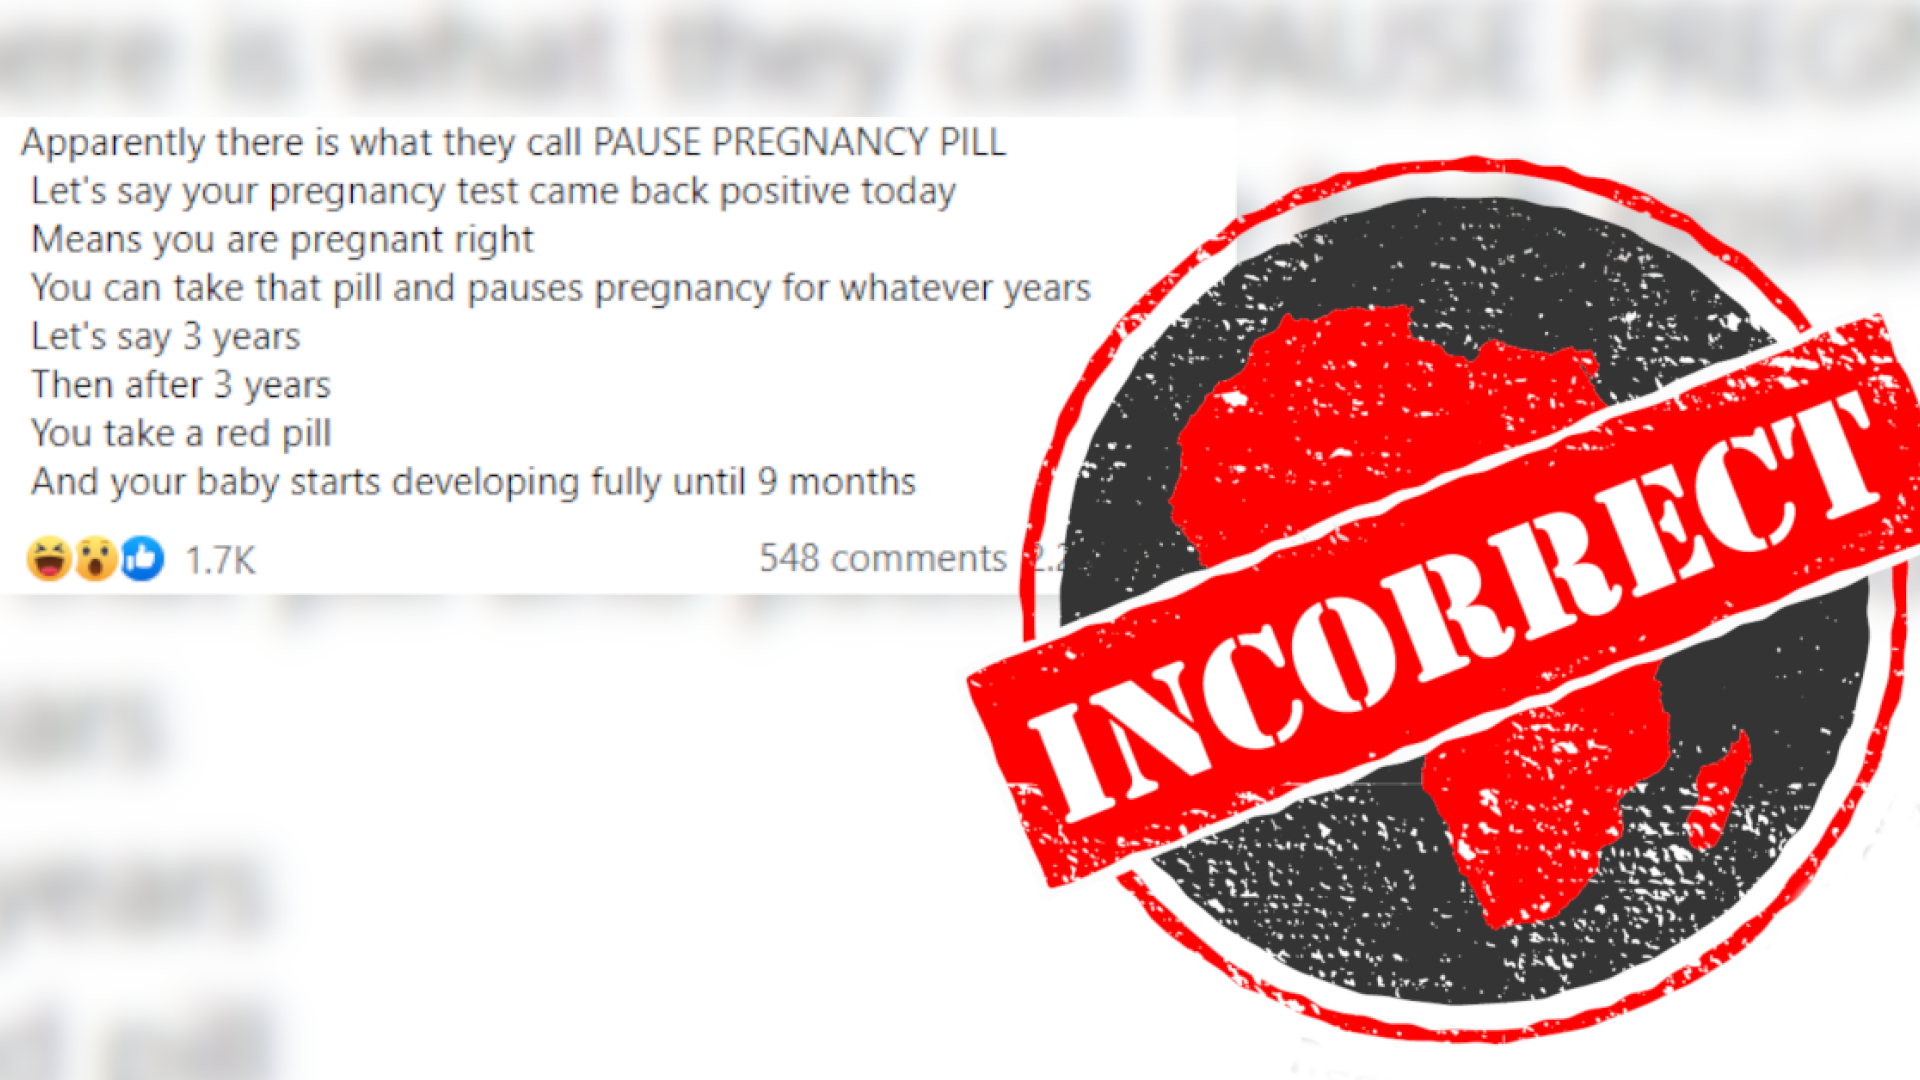 No pill able to ‘pause’ a pregnancy - Africa Check